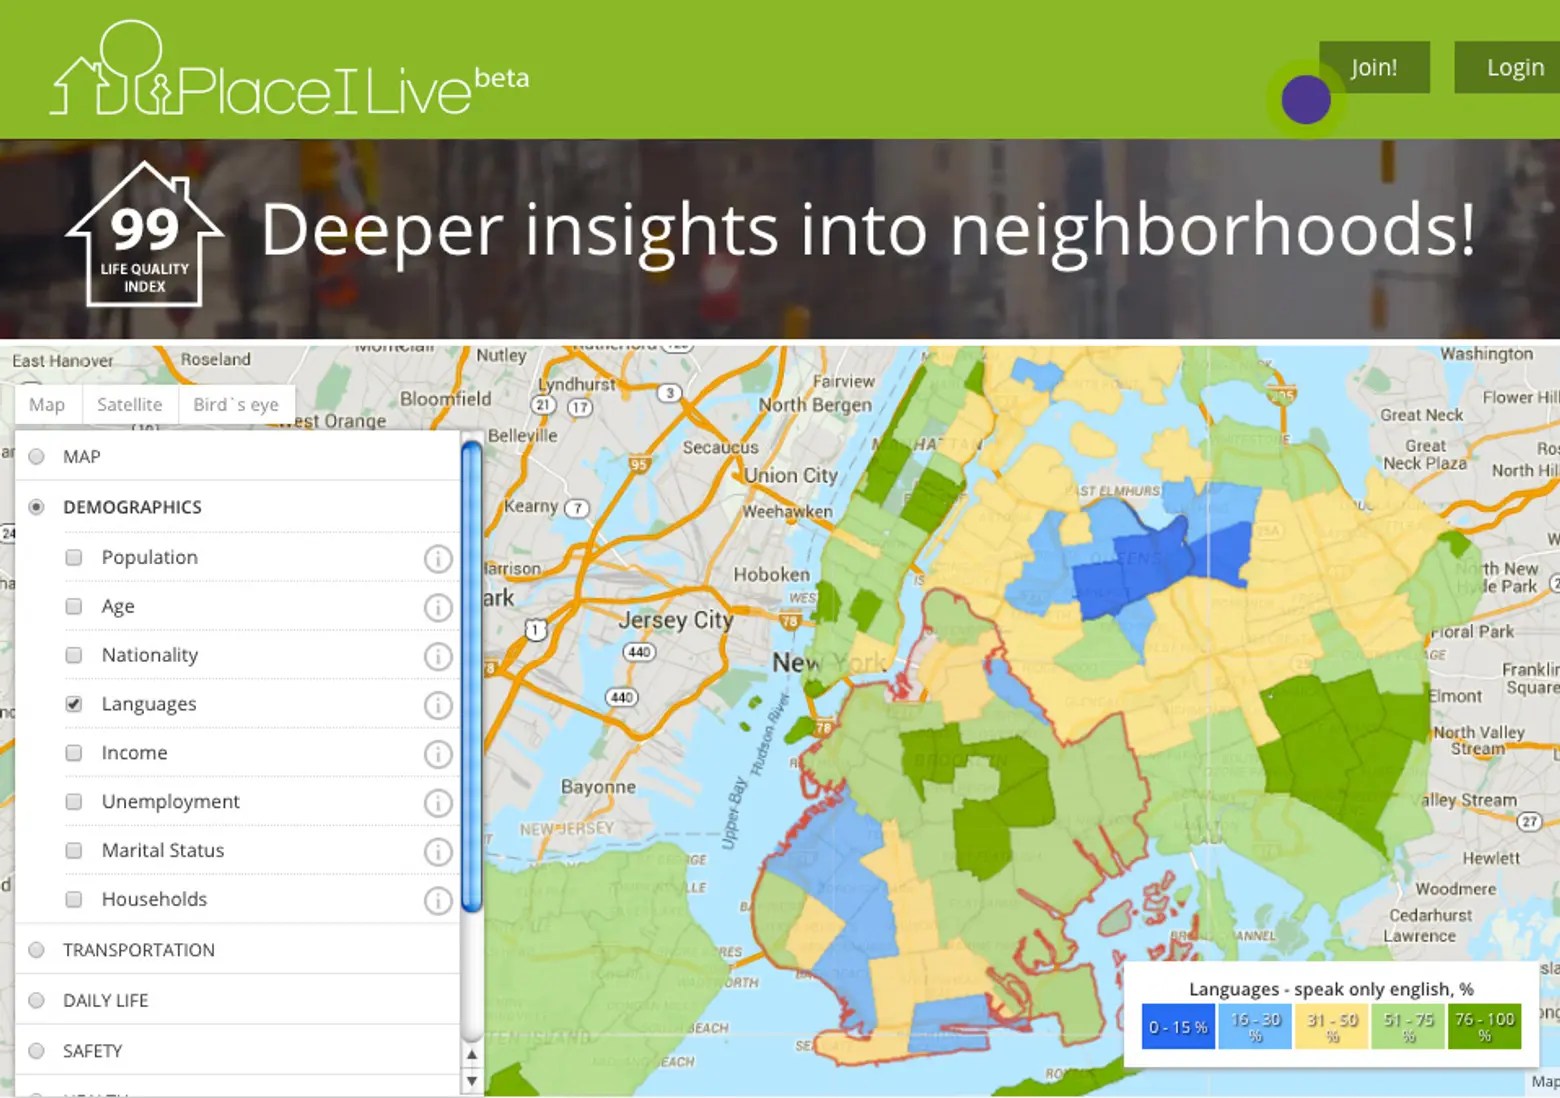 Do You Really Know Your Neighborhood? Interactive Map Helps You Find Out More on Who’s Around